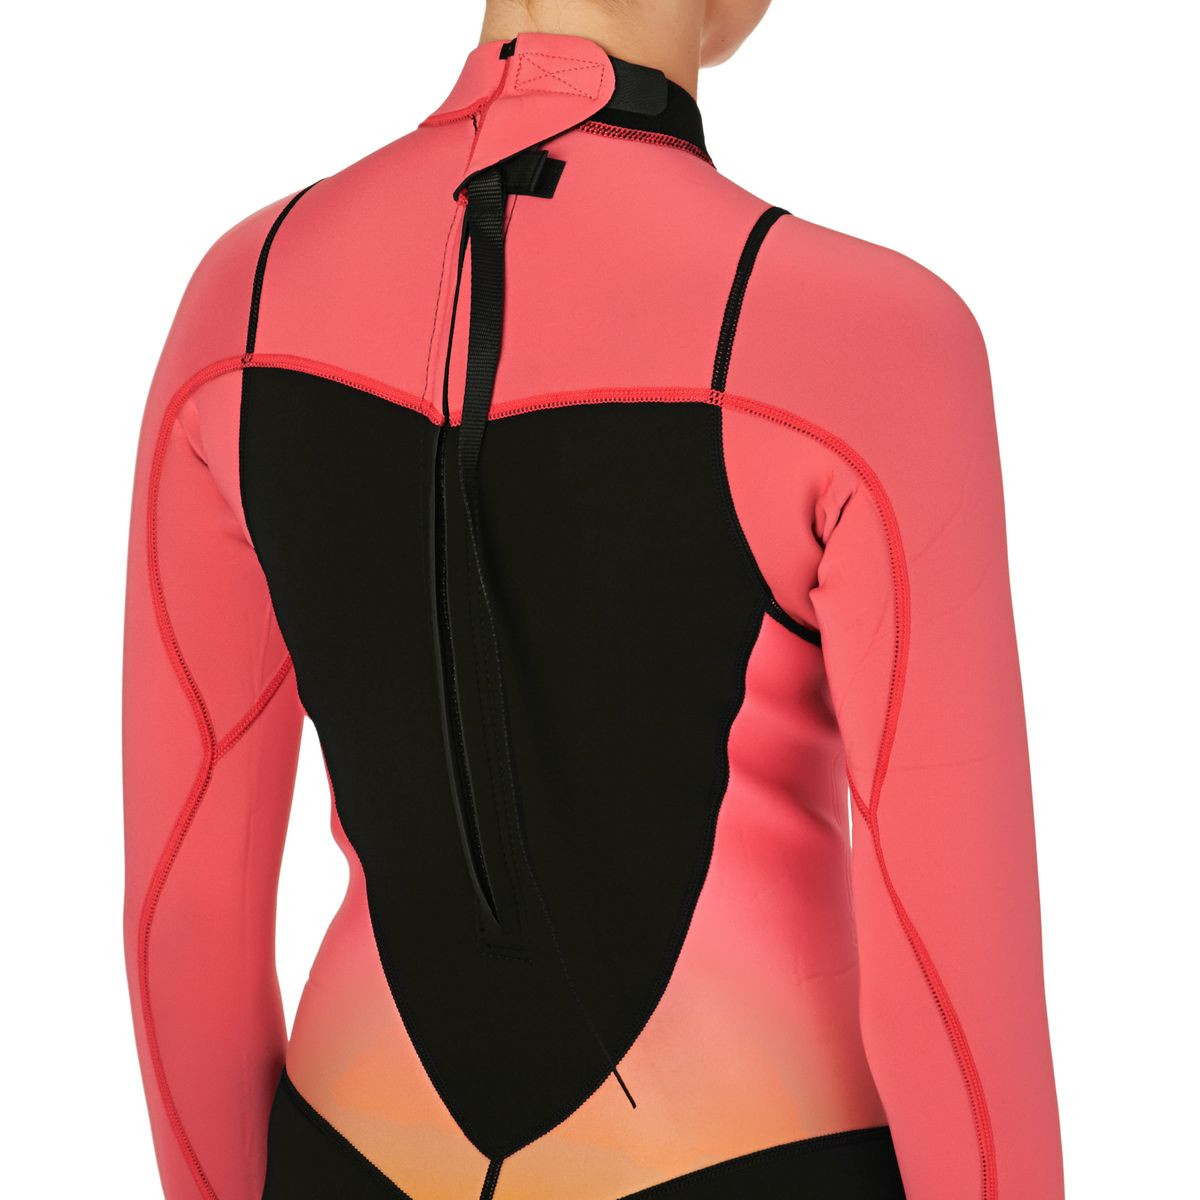 Roxy Womens Syncro 2mm Shorty Wetsuit - Paradise Pink